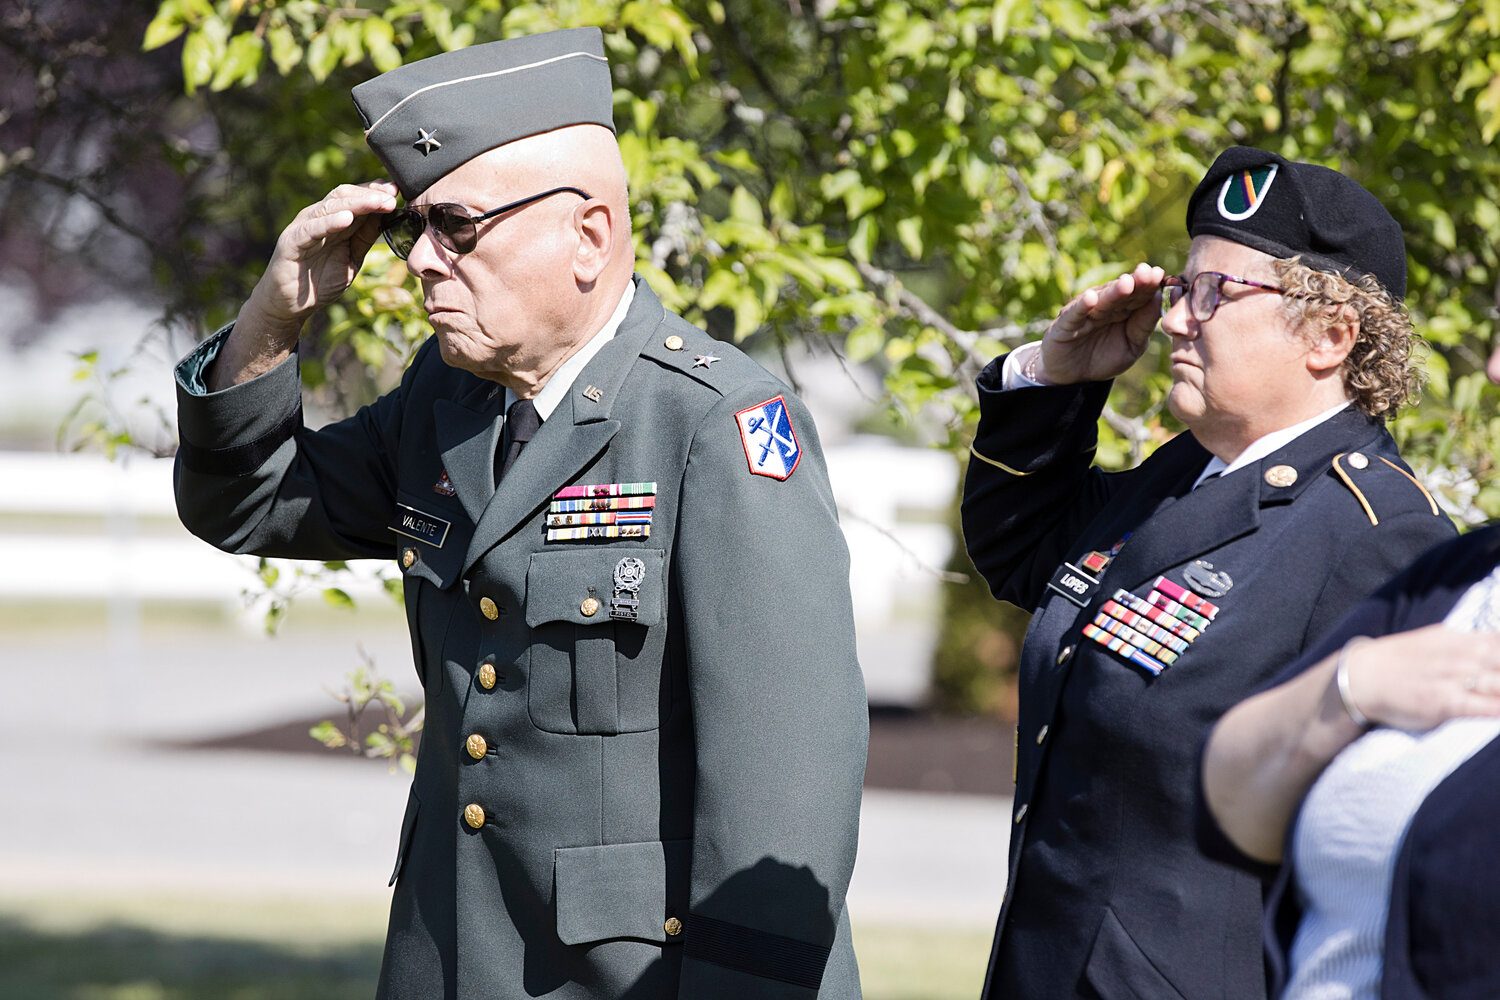 General Valente, Brigadier General (retired) Commander of the 43rd Military Police Brigade, 1990-1995, and Marissa Lopes, Retired Command Sergeant Major - Army, offer a salute during the playing of TAPS.